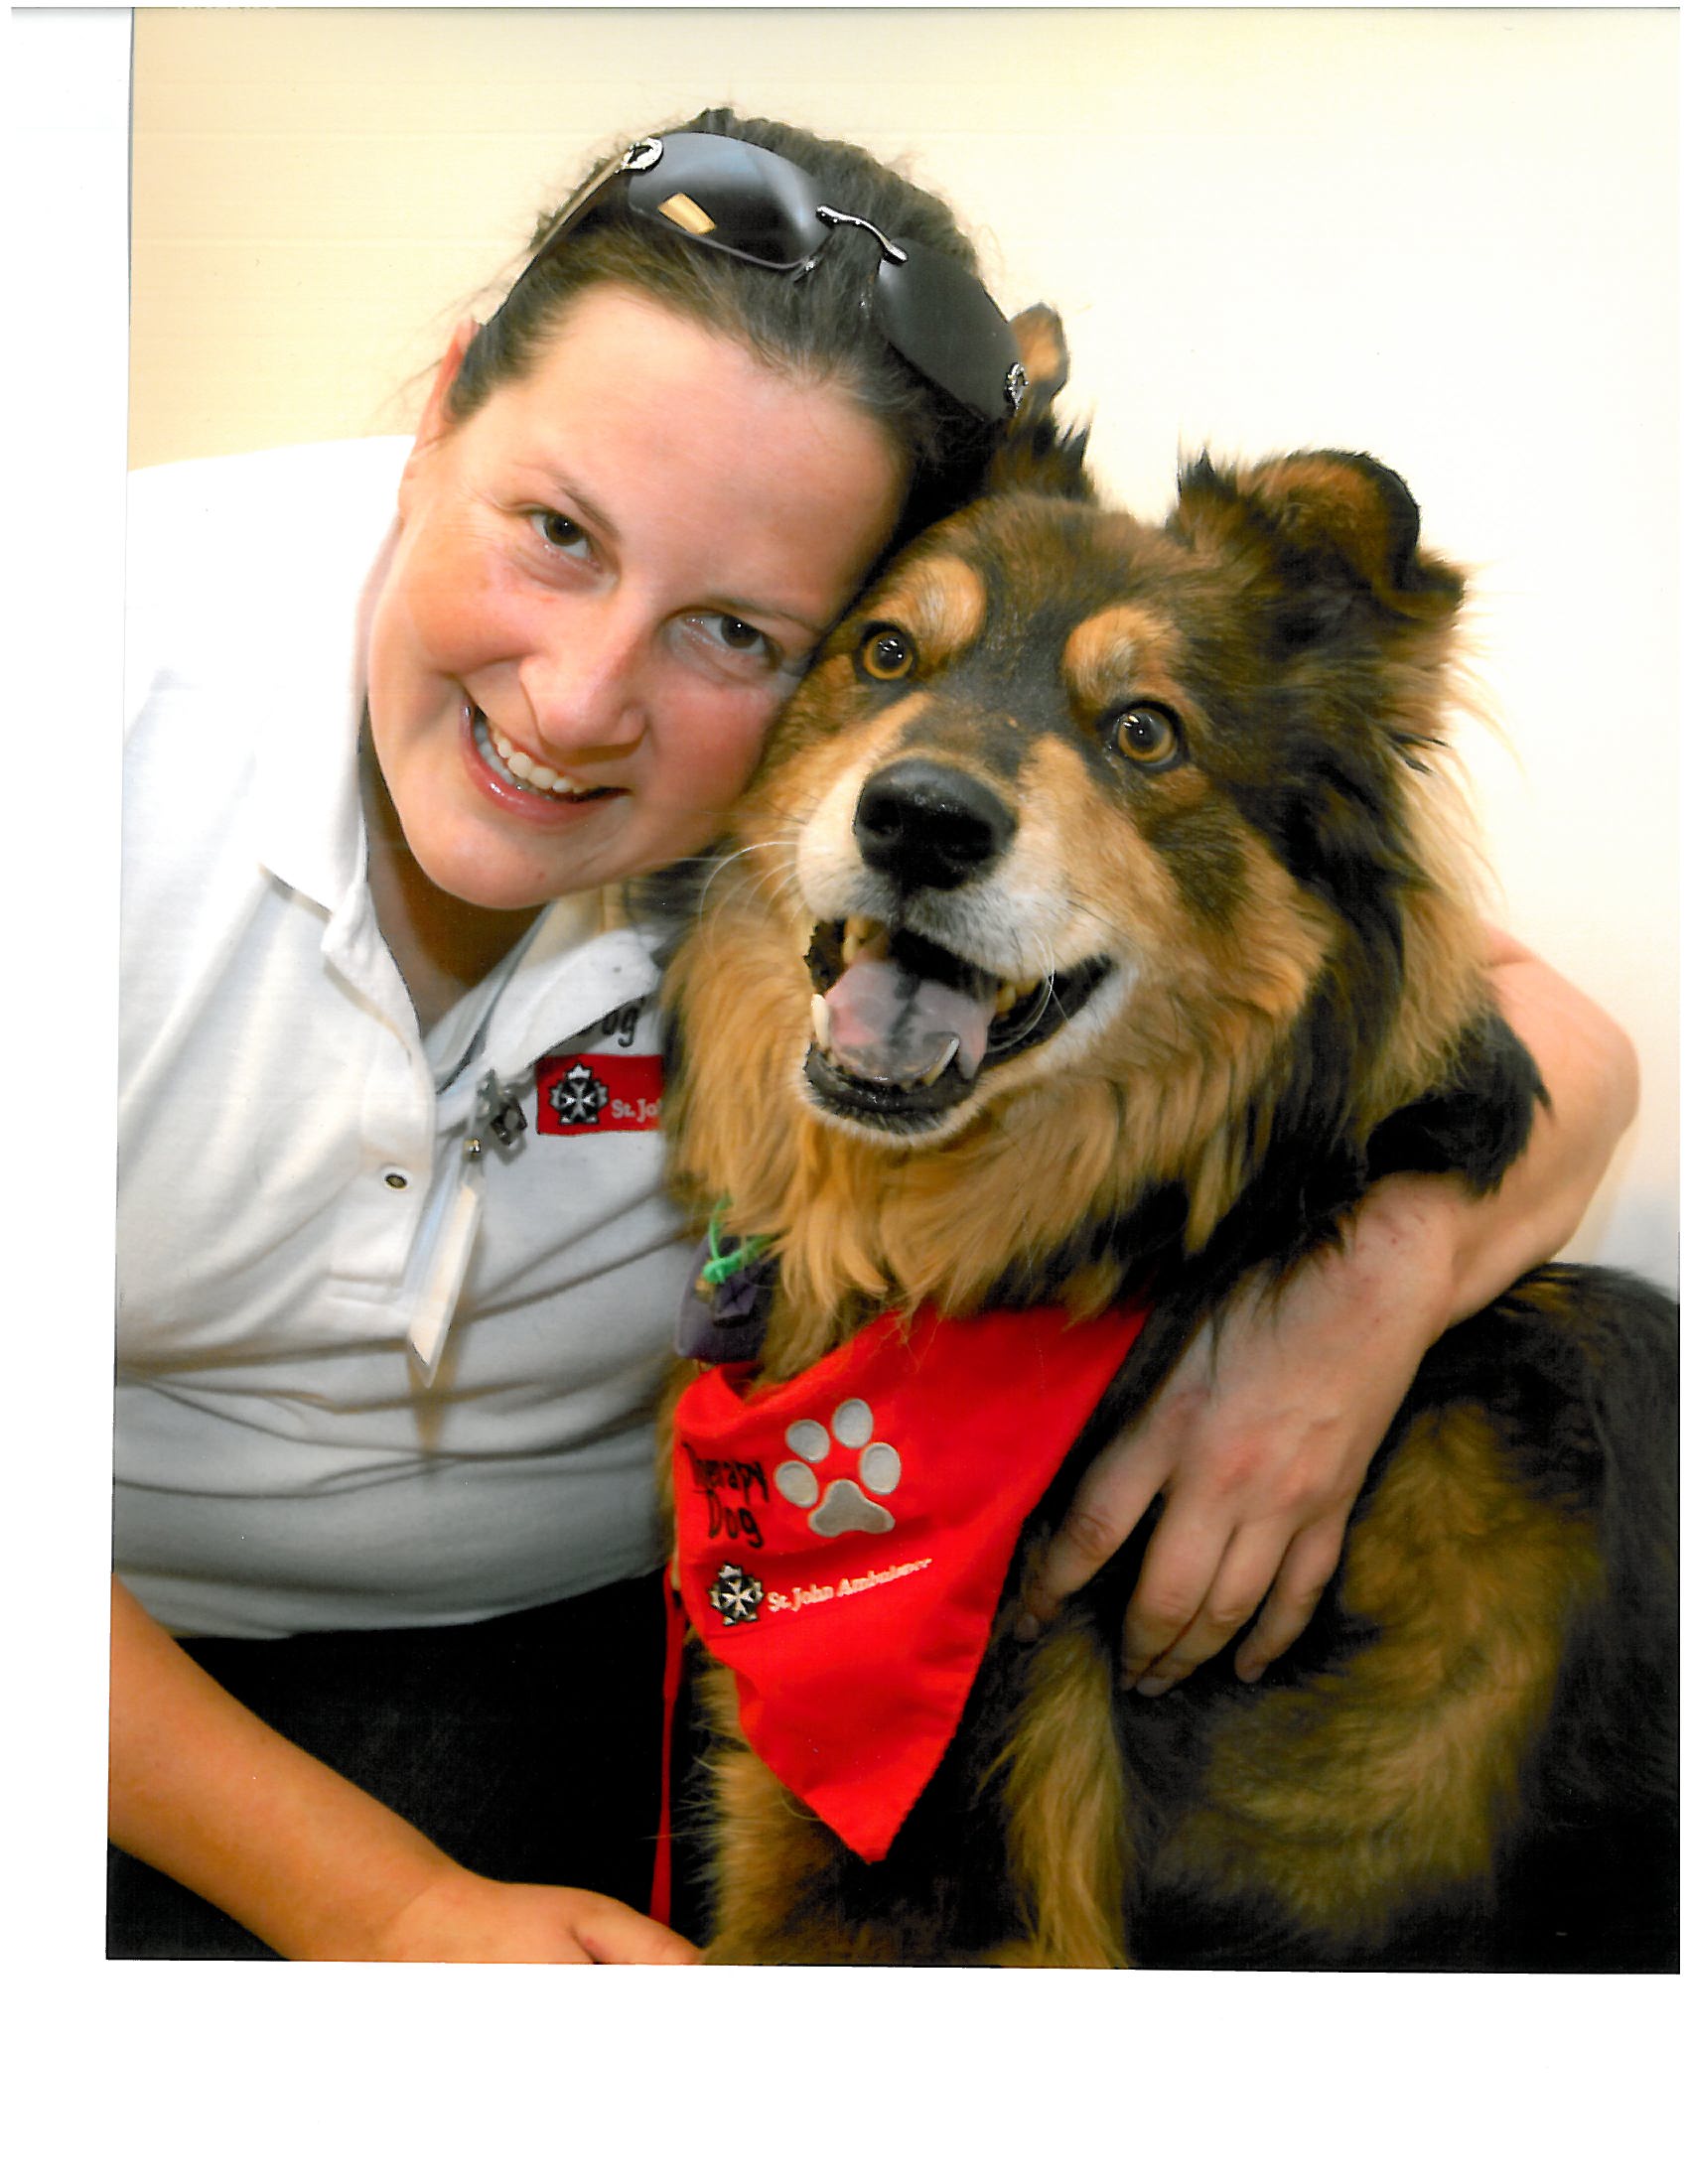 PROVIDING COMFORT- Connie Bohnsack and Rooster can often be seen visiting seniors’ homes